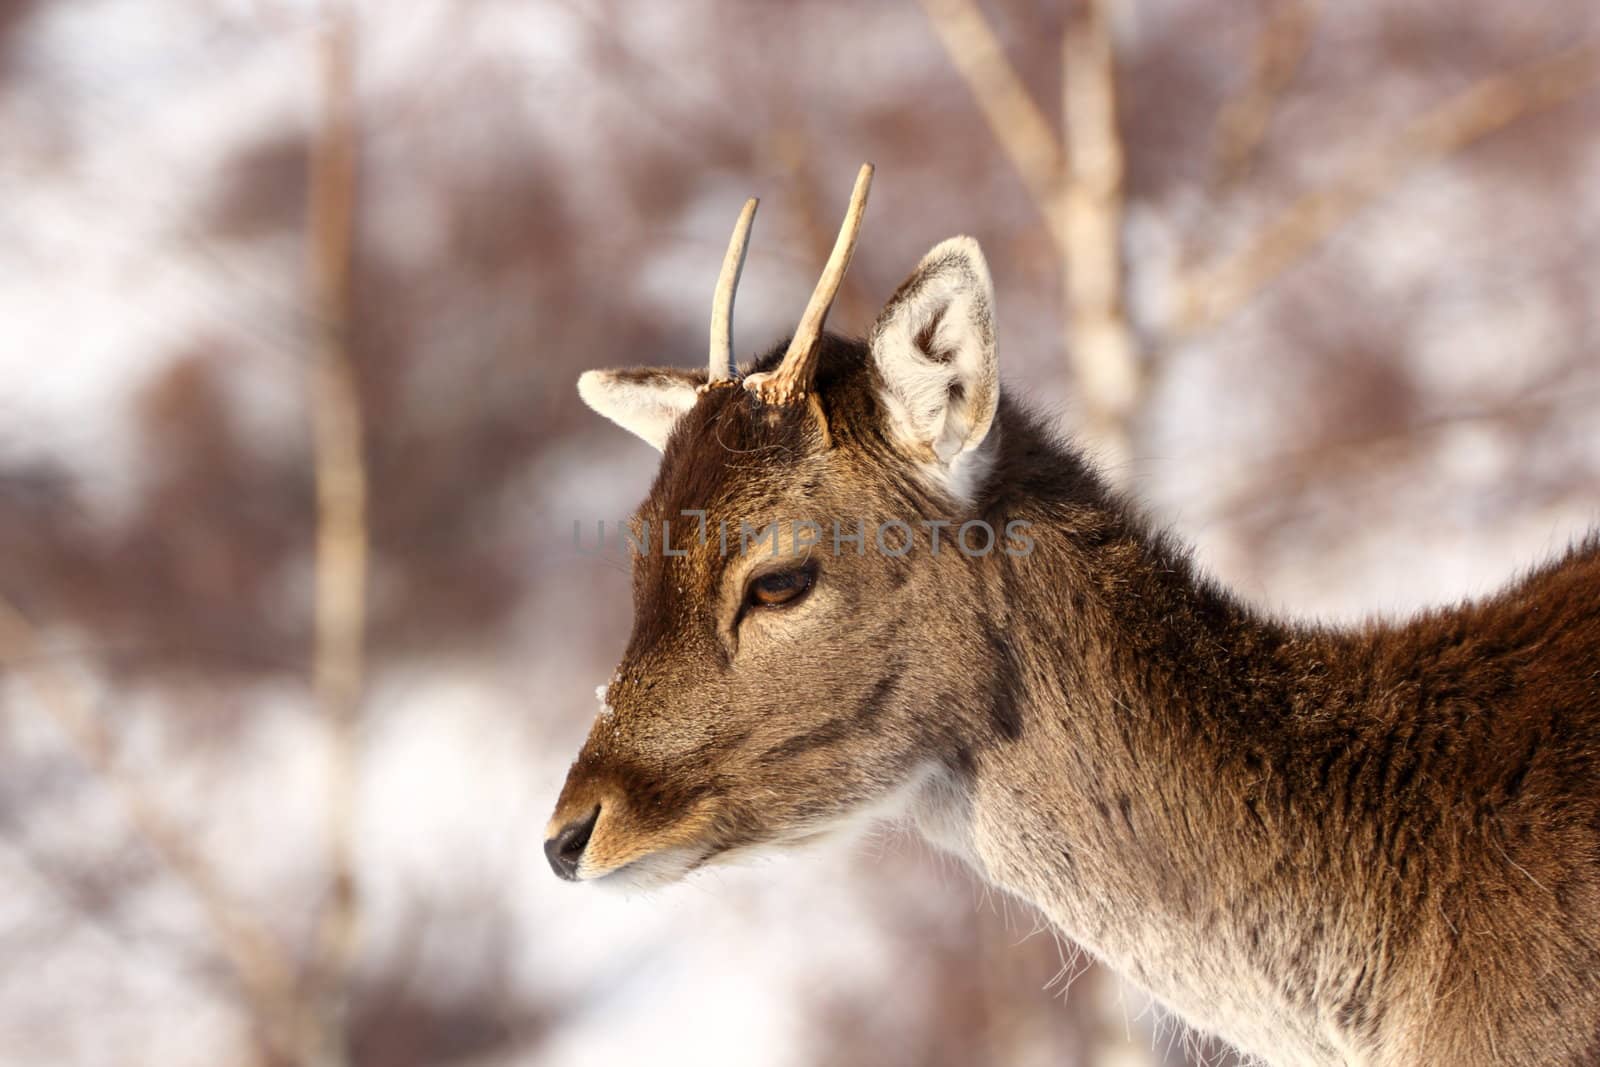 small antlers growing on a young fallow deer stag